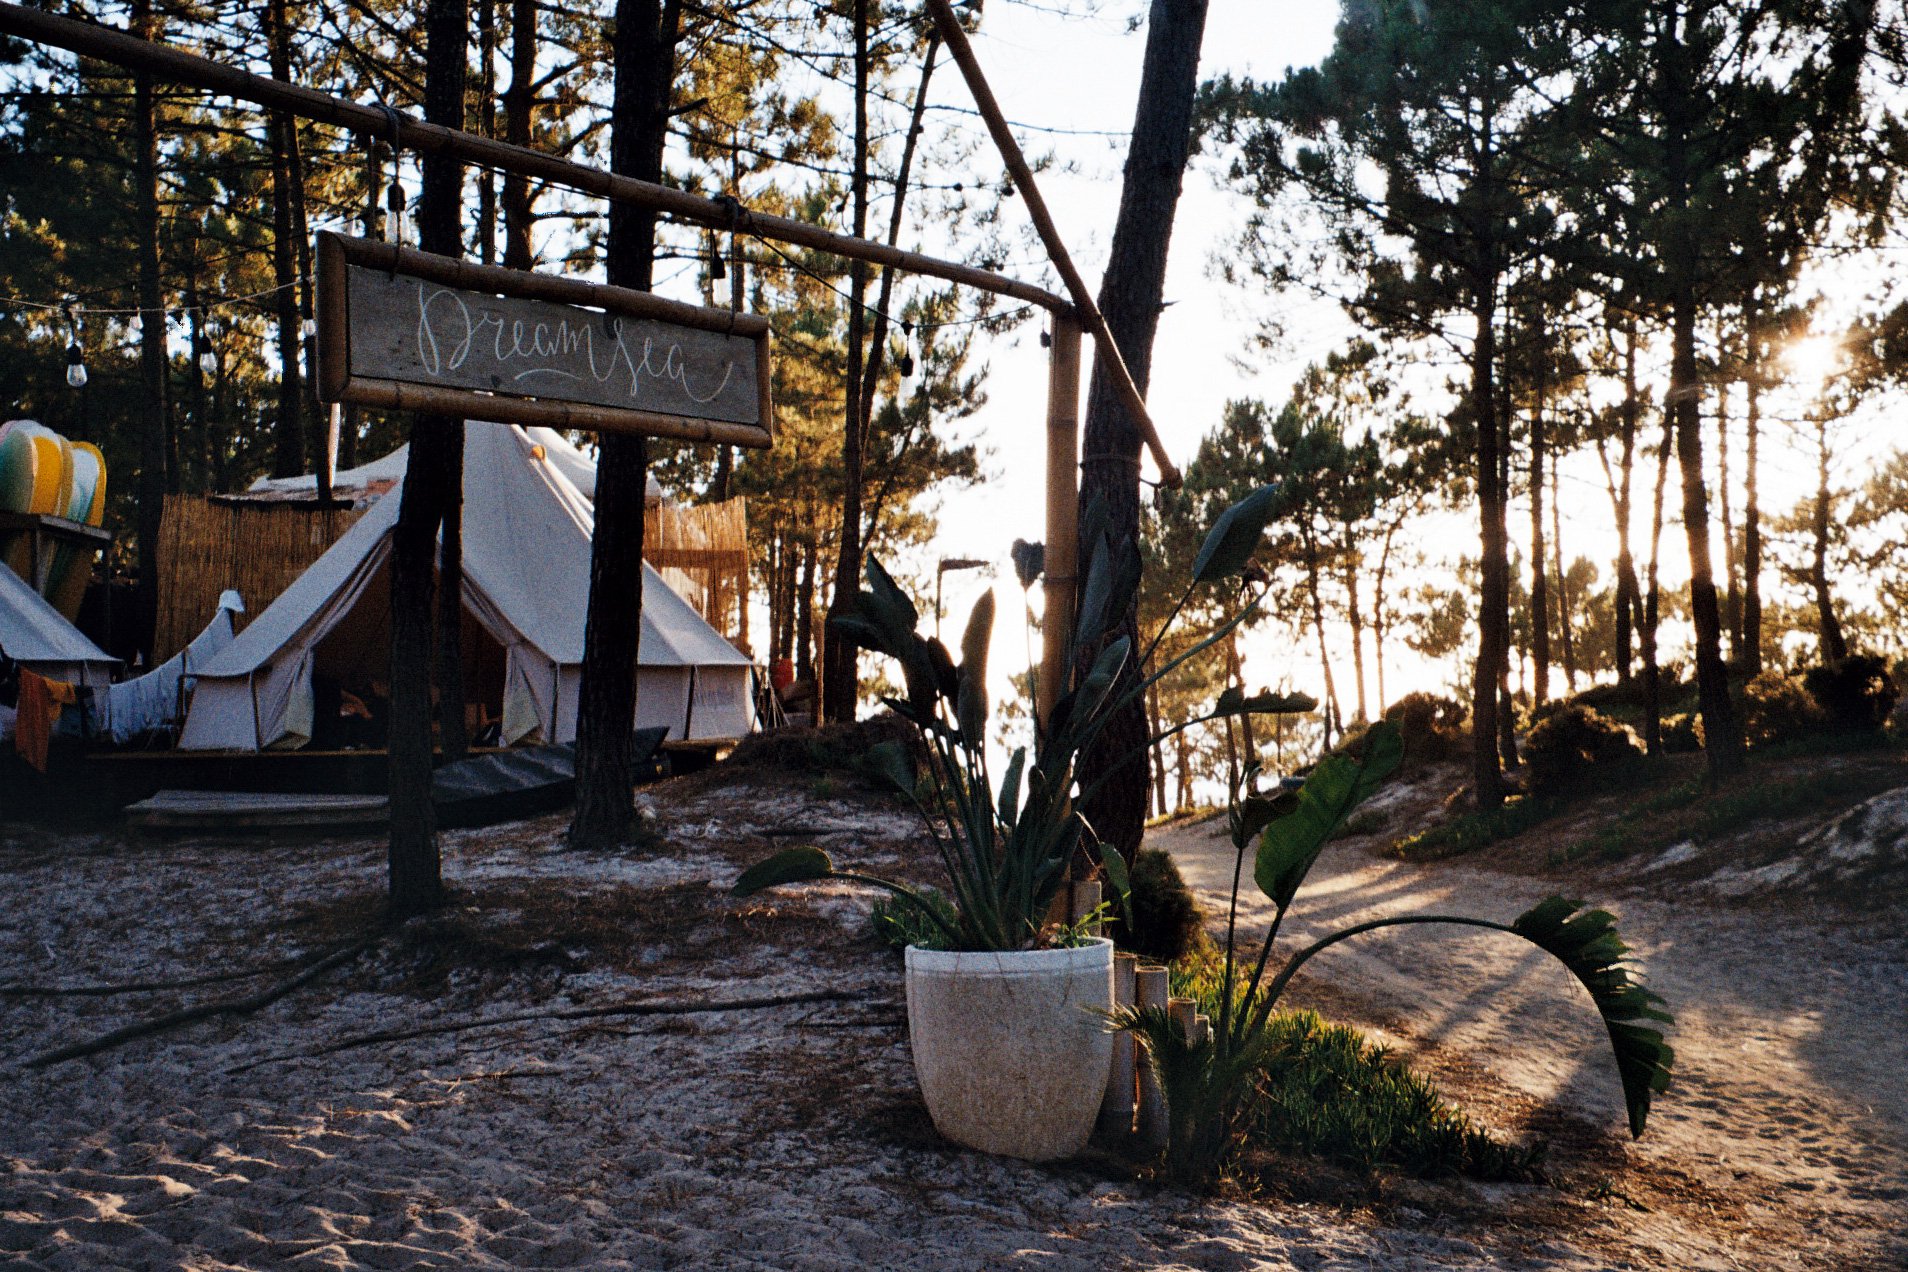 Dreamsea Surf Camp in Portugal by @paris.with.me